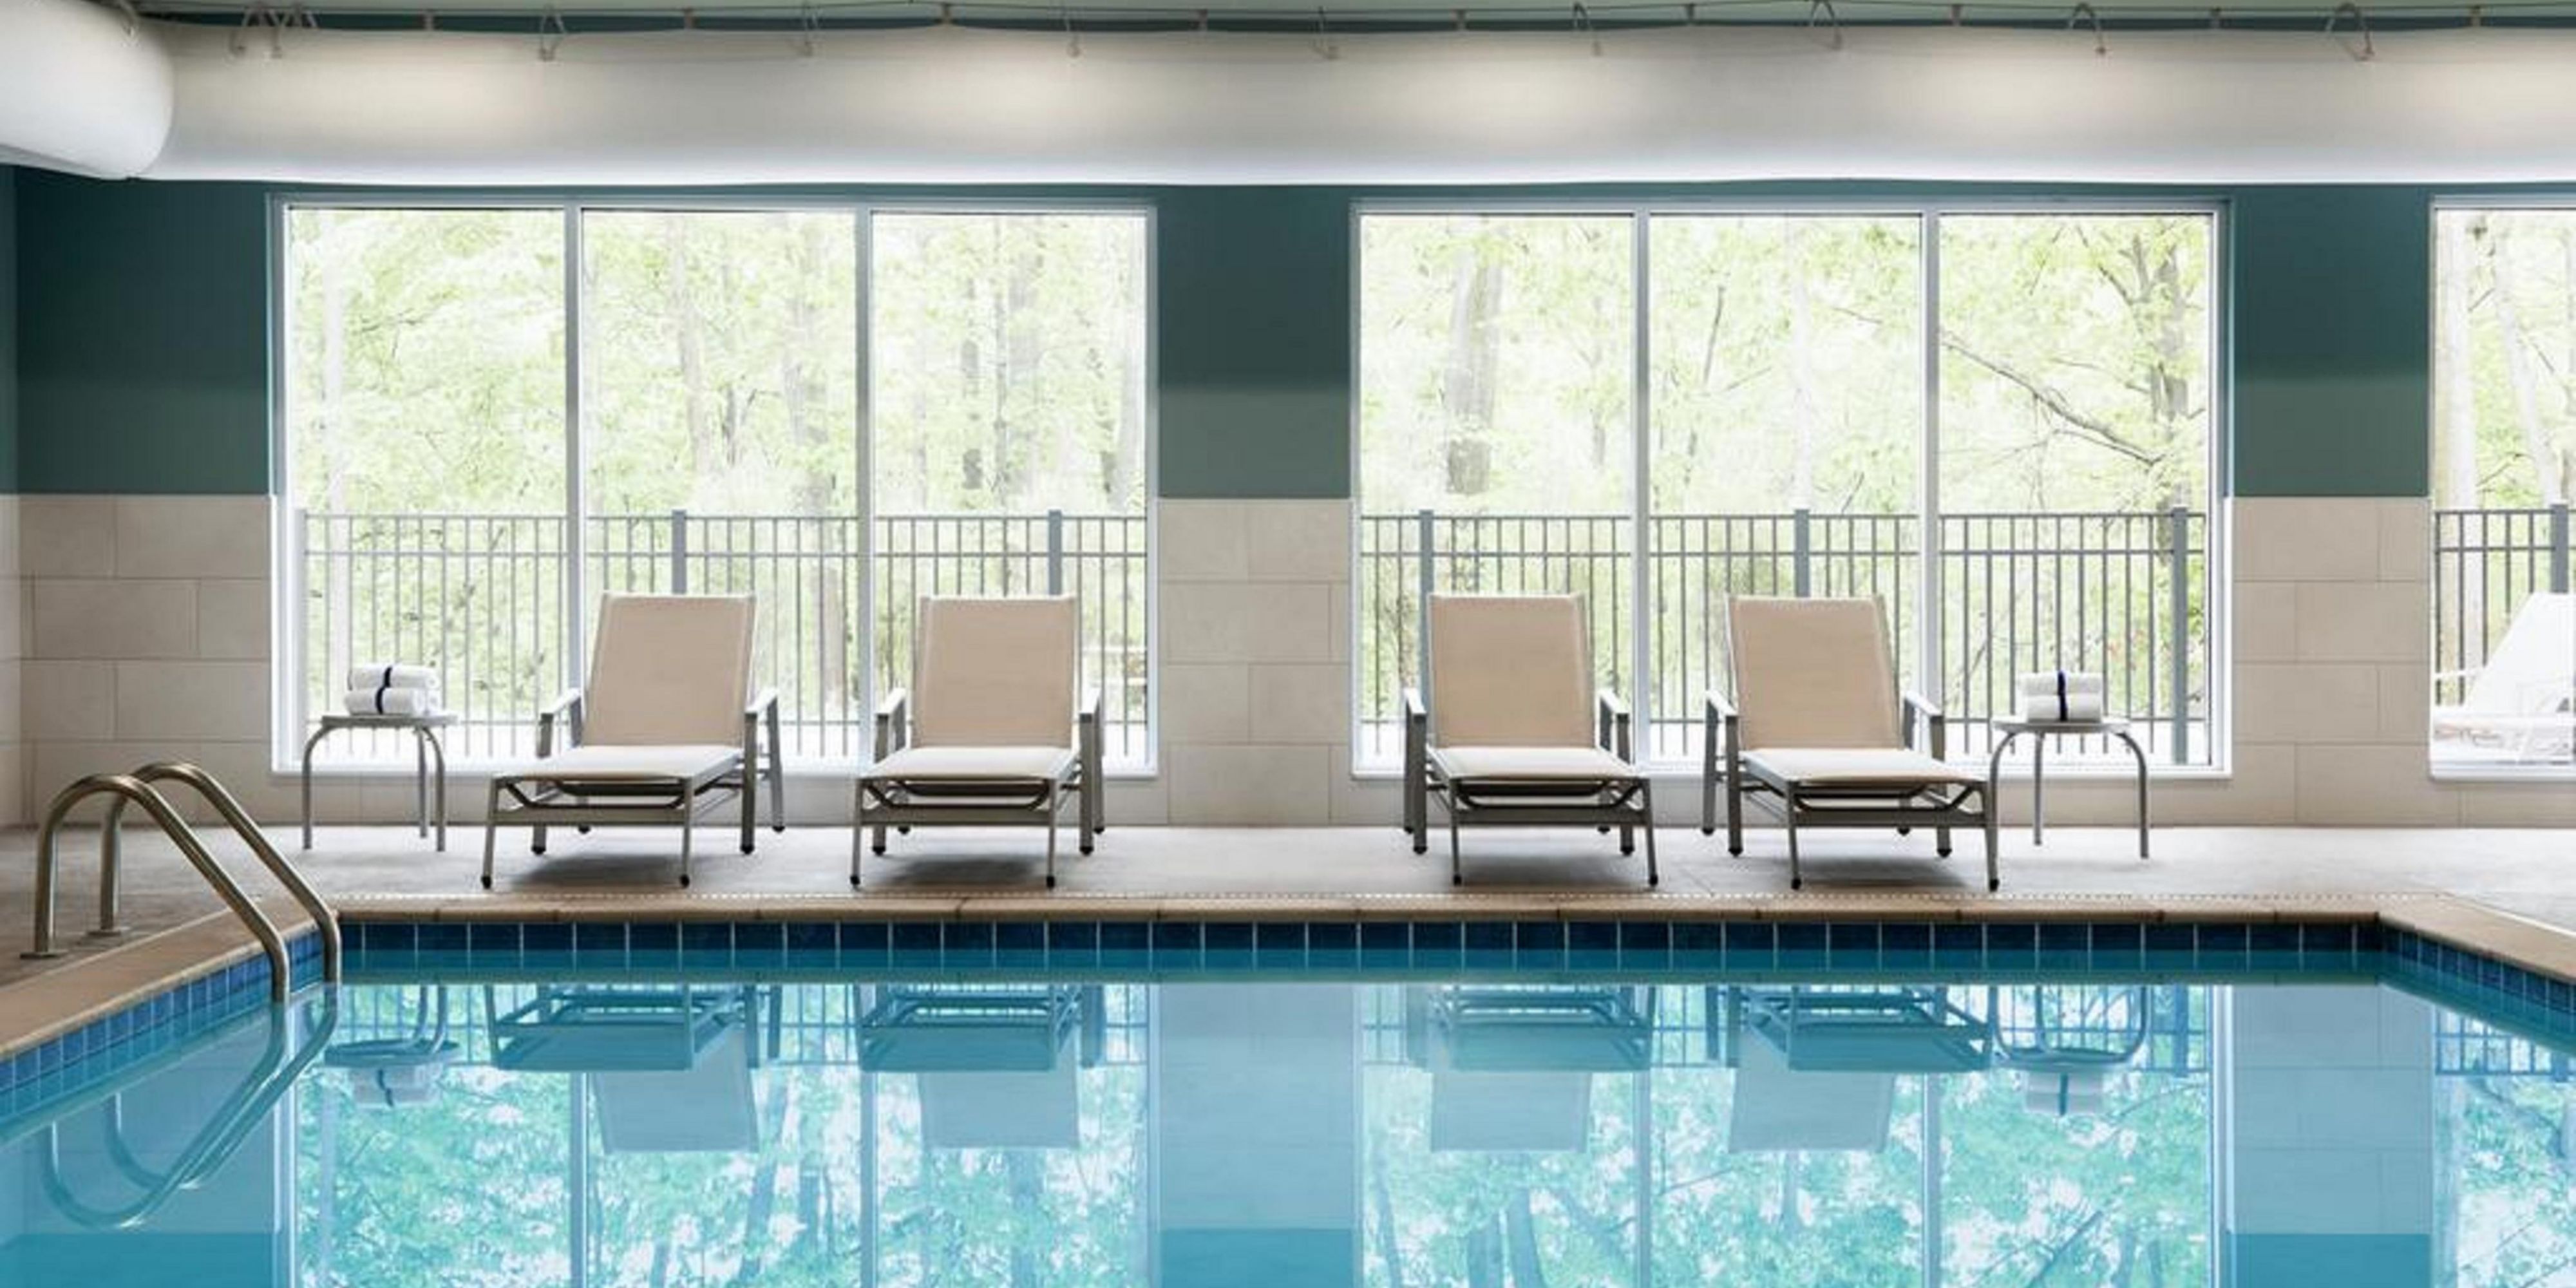 Take a dip in our heated indoor pool! A great area to relax and unwind after a day on the road. 